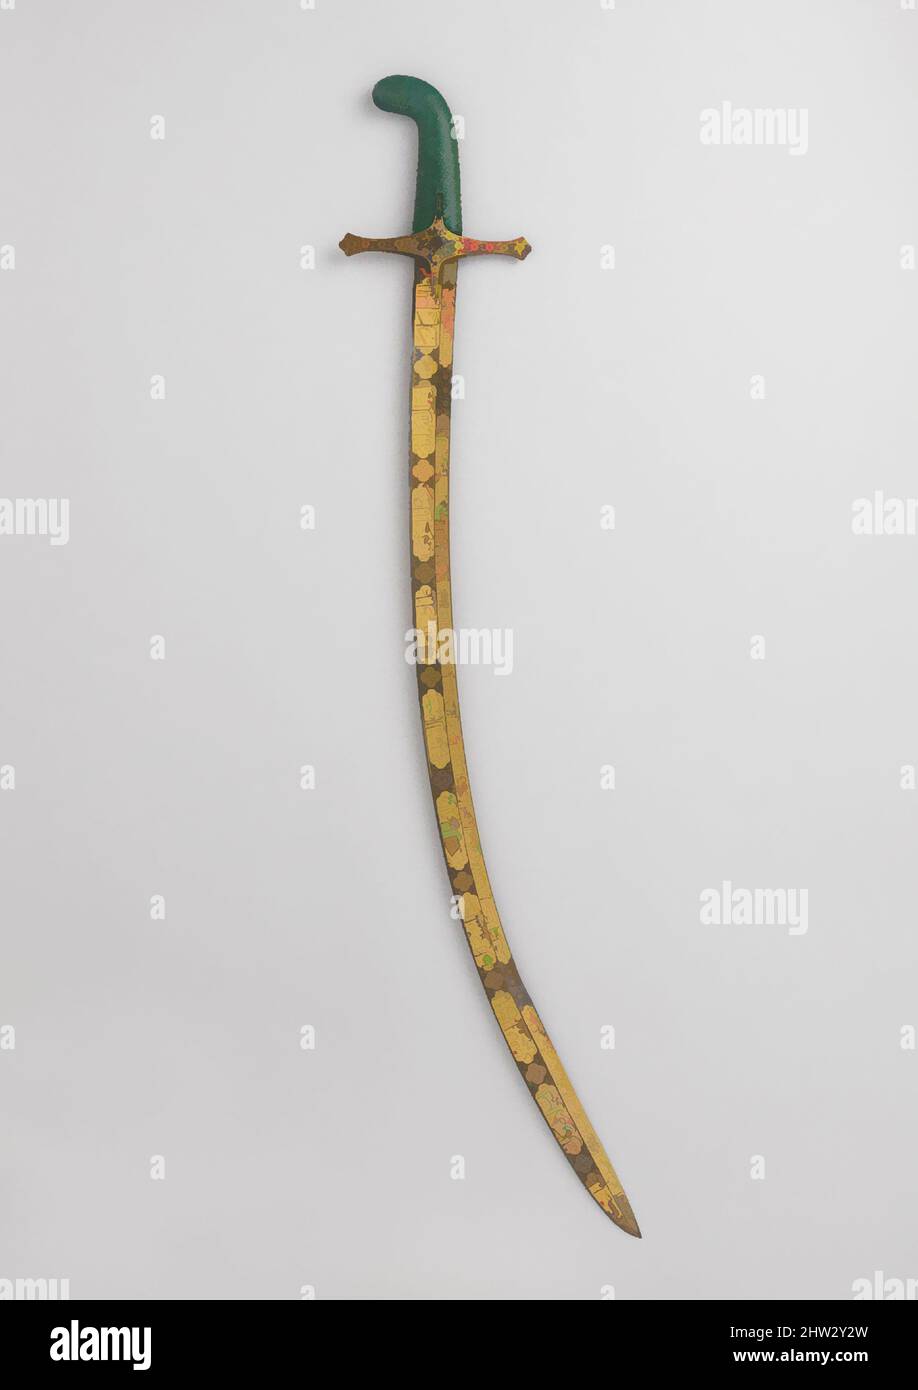 Art inspired by Saber, 1522–66, probably Istanbul, Turkish, probably Istanbul, Steel, gold, fish skin, wood, L. 37 7/8 in. (96.2 cm); L. of blade 30 3/4 in. (78.1 cm); W. 6 1/8 in. (15.5 cm); Wt. 2 lb. 5 oz. (1049 g), Swords, This saber is fitted with one of the finest and best-, Classic works modernized by Artotop with a splash of modernity. Shapes, color and value, eye-catching visual impact on art. Emotions through freedom of artworks in a contemporary way. A timeless message pursuing a wildly creative new direction. Artists turning to the digital medium and creating the Artotop NFT Stock Photo